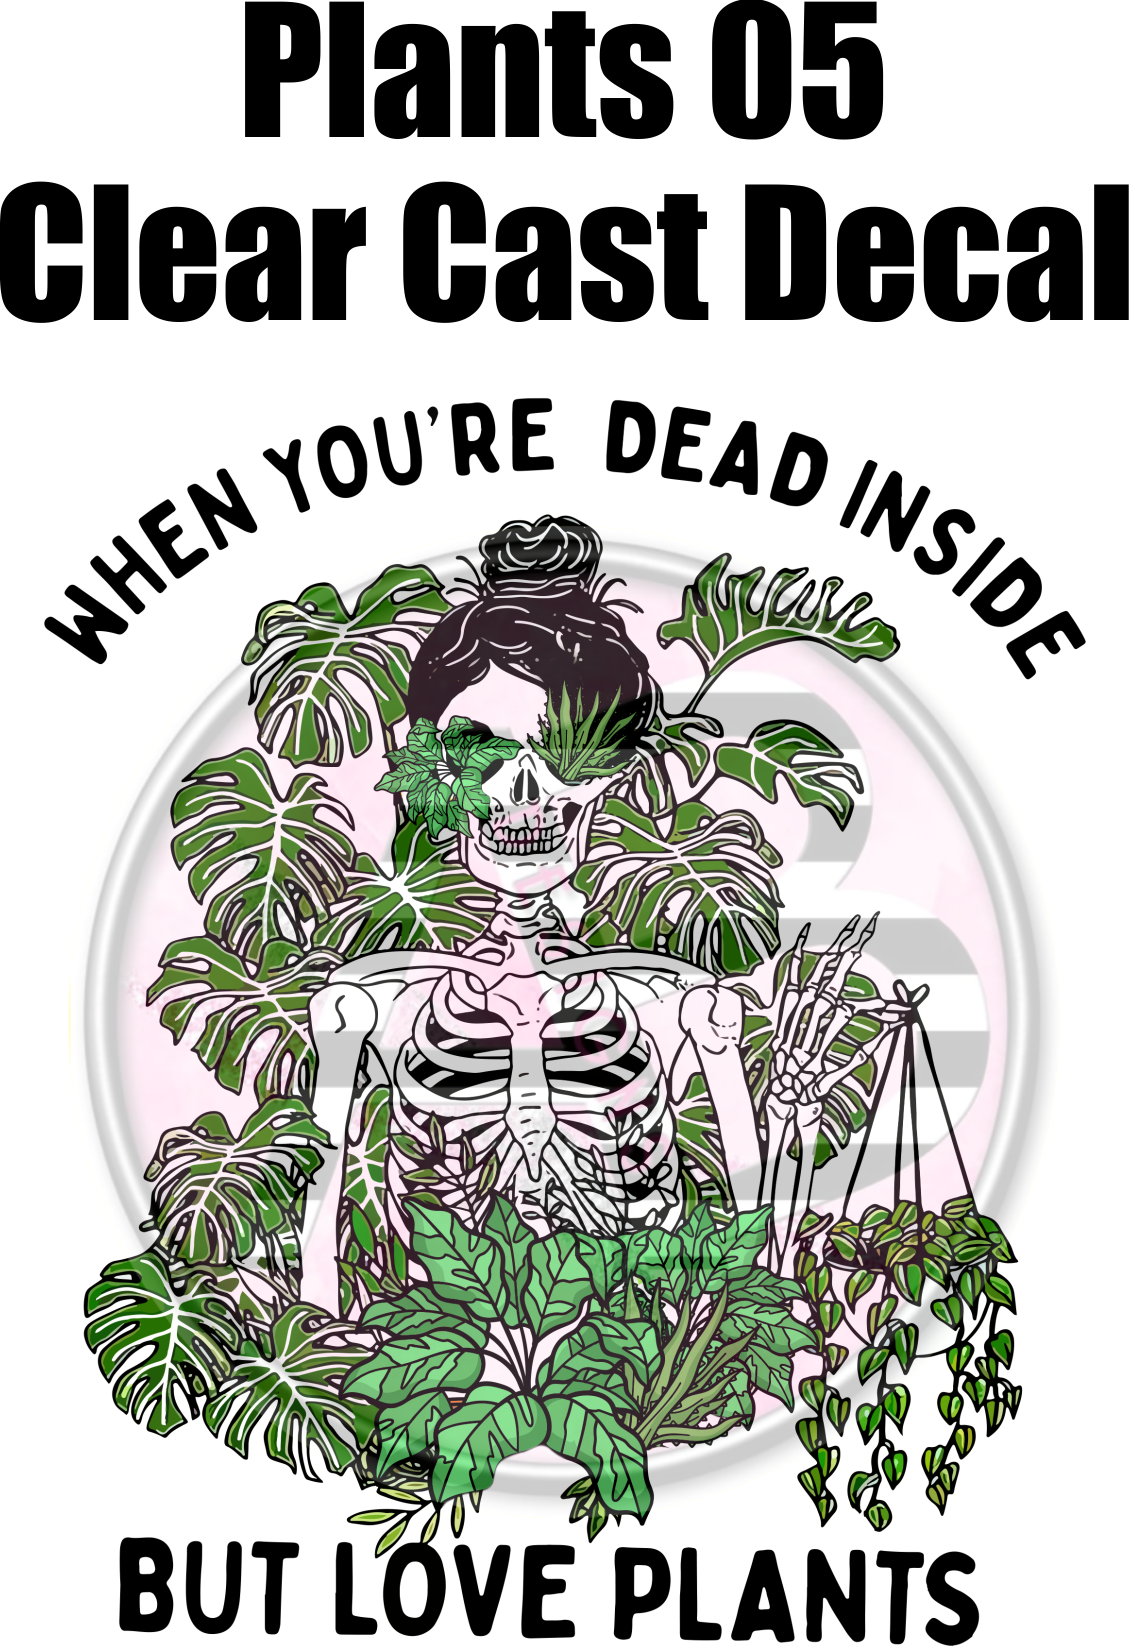 Plants 05 - Clear Cast Decal - 122